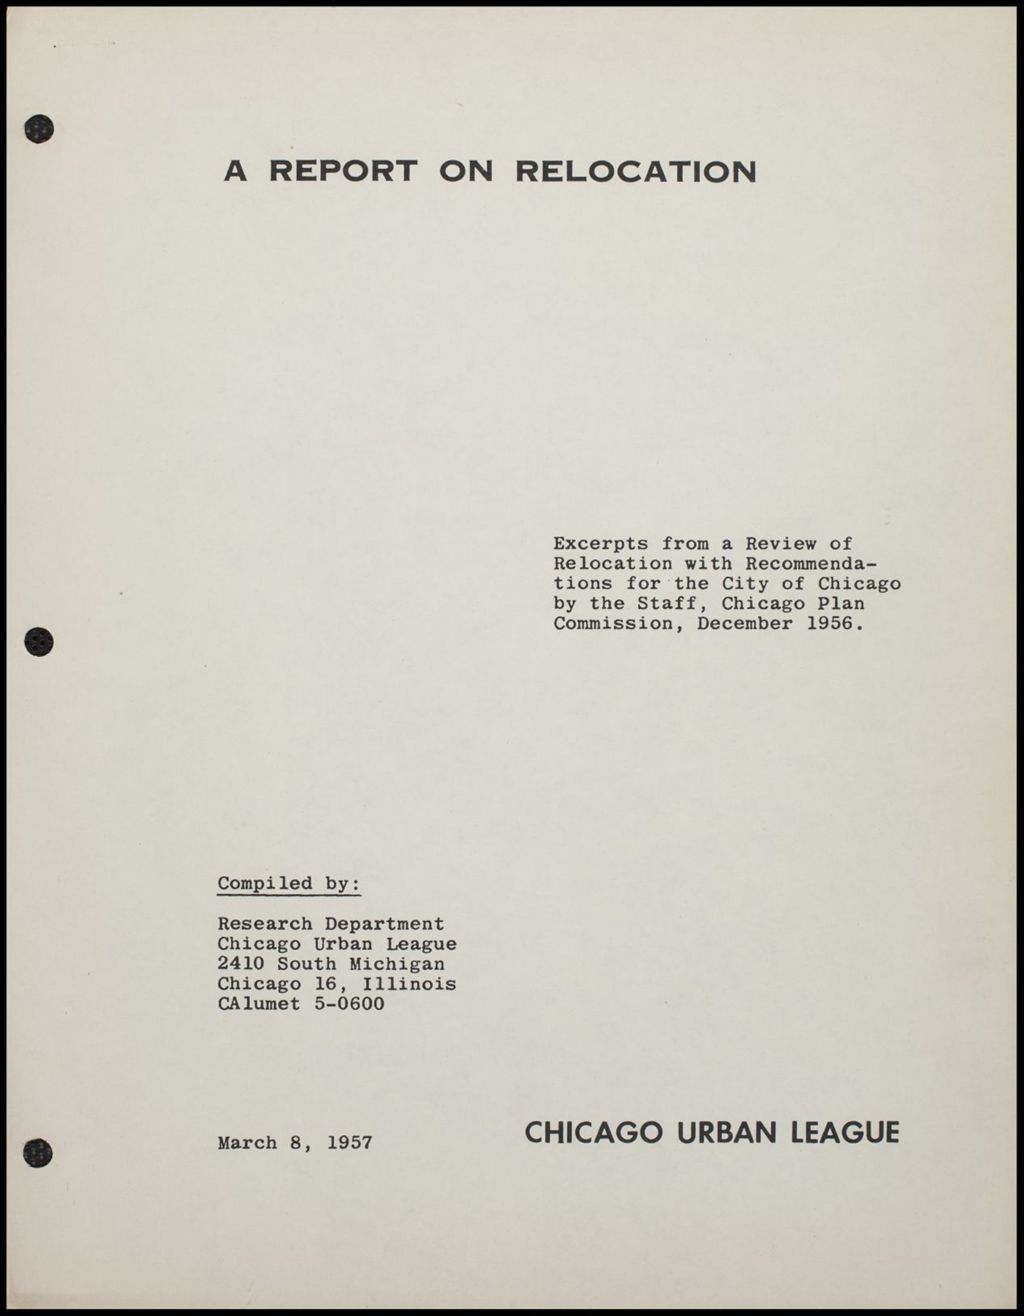 Miniature of CUL Community Services Advisory Committee Special Data and Reports, 1956-1957 (Folder III-2454)